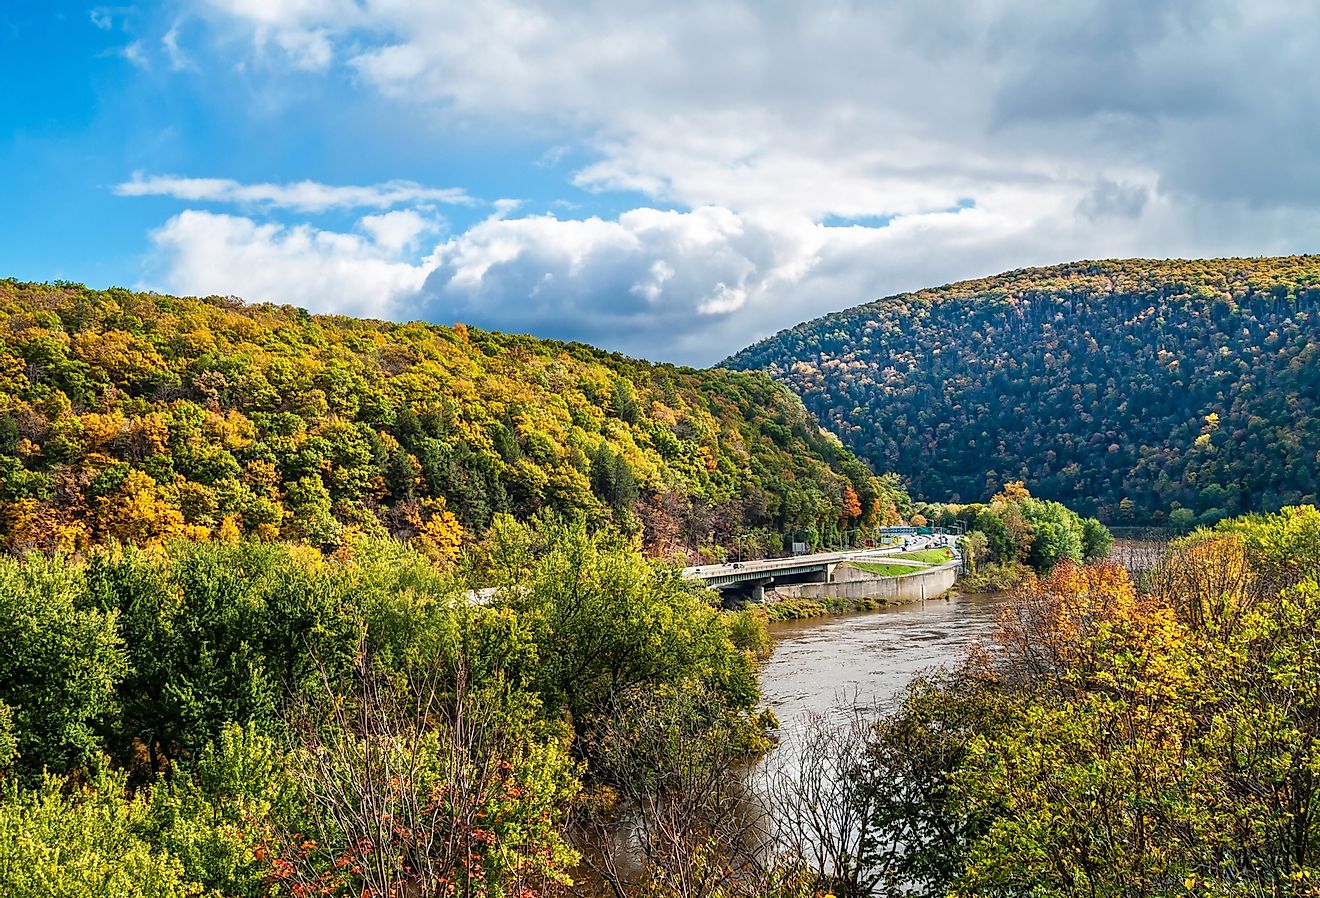 A scenic view of the Delaware Water Gap between Pennsylvania and New Jersey.